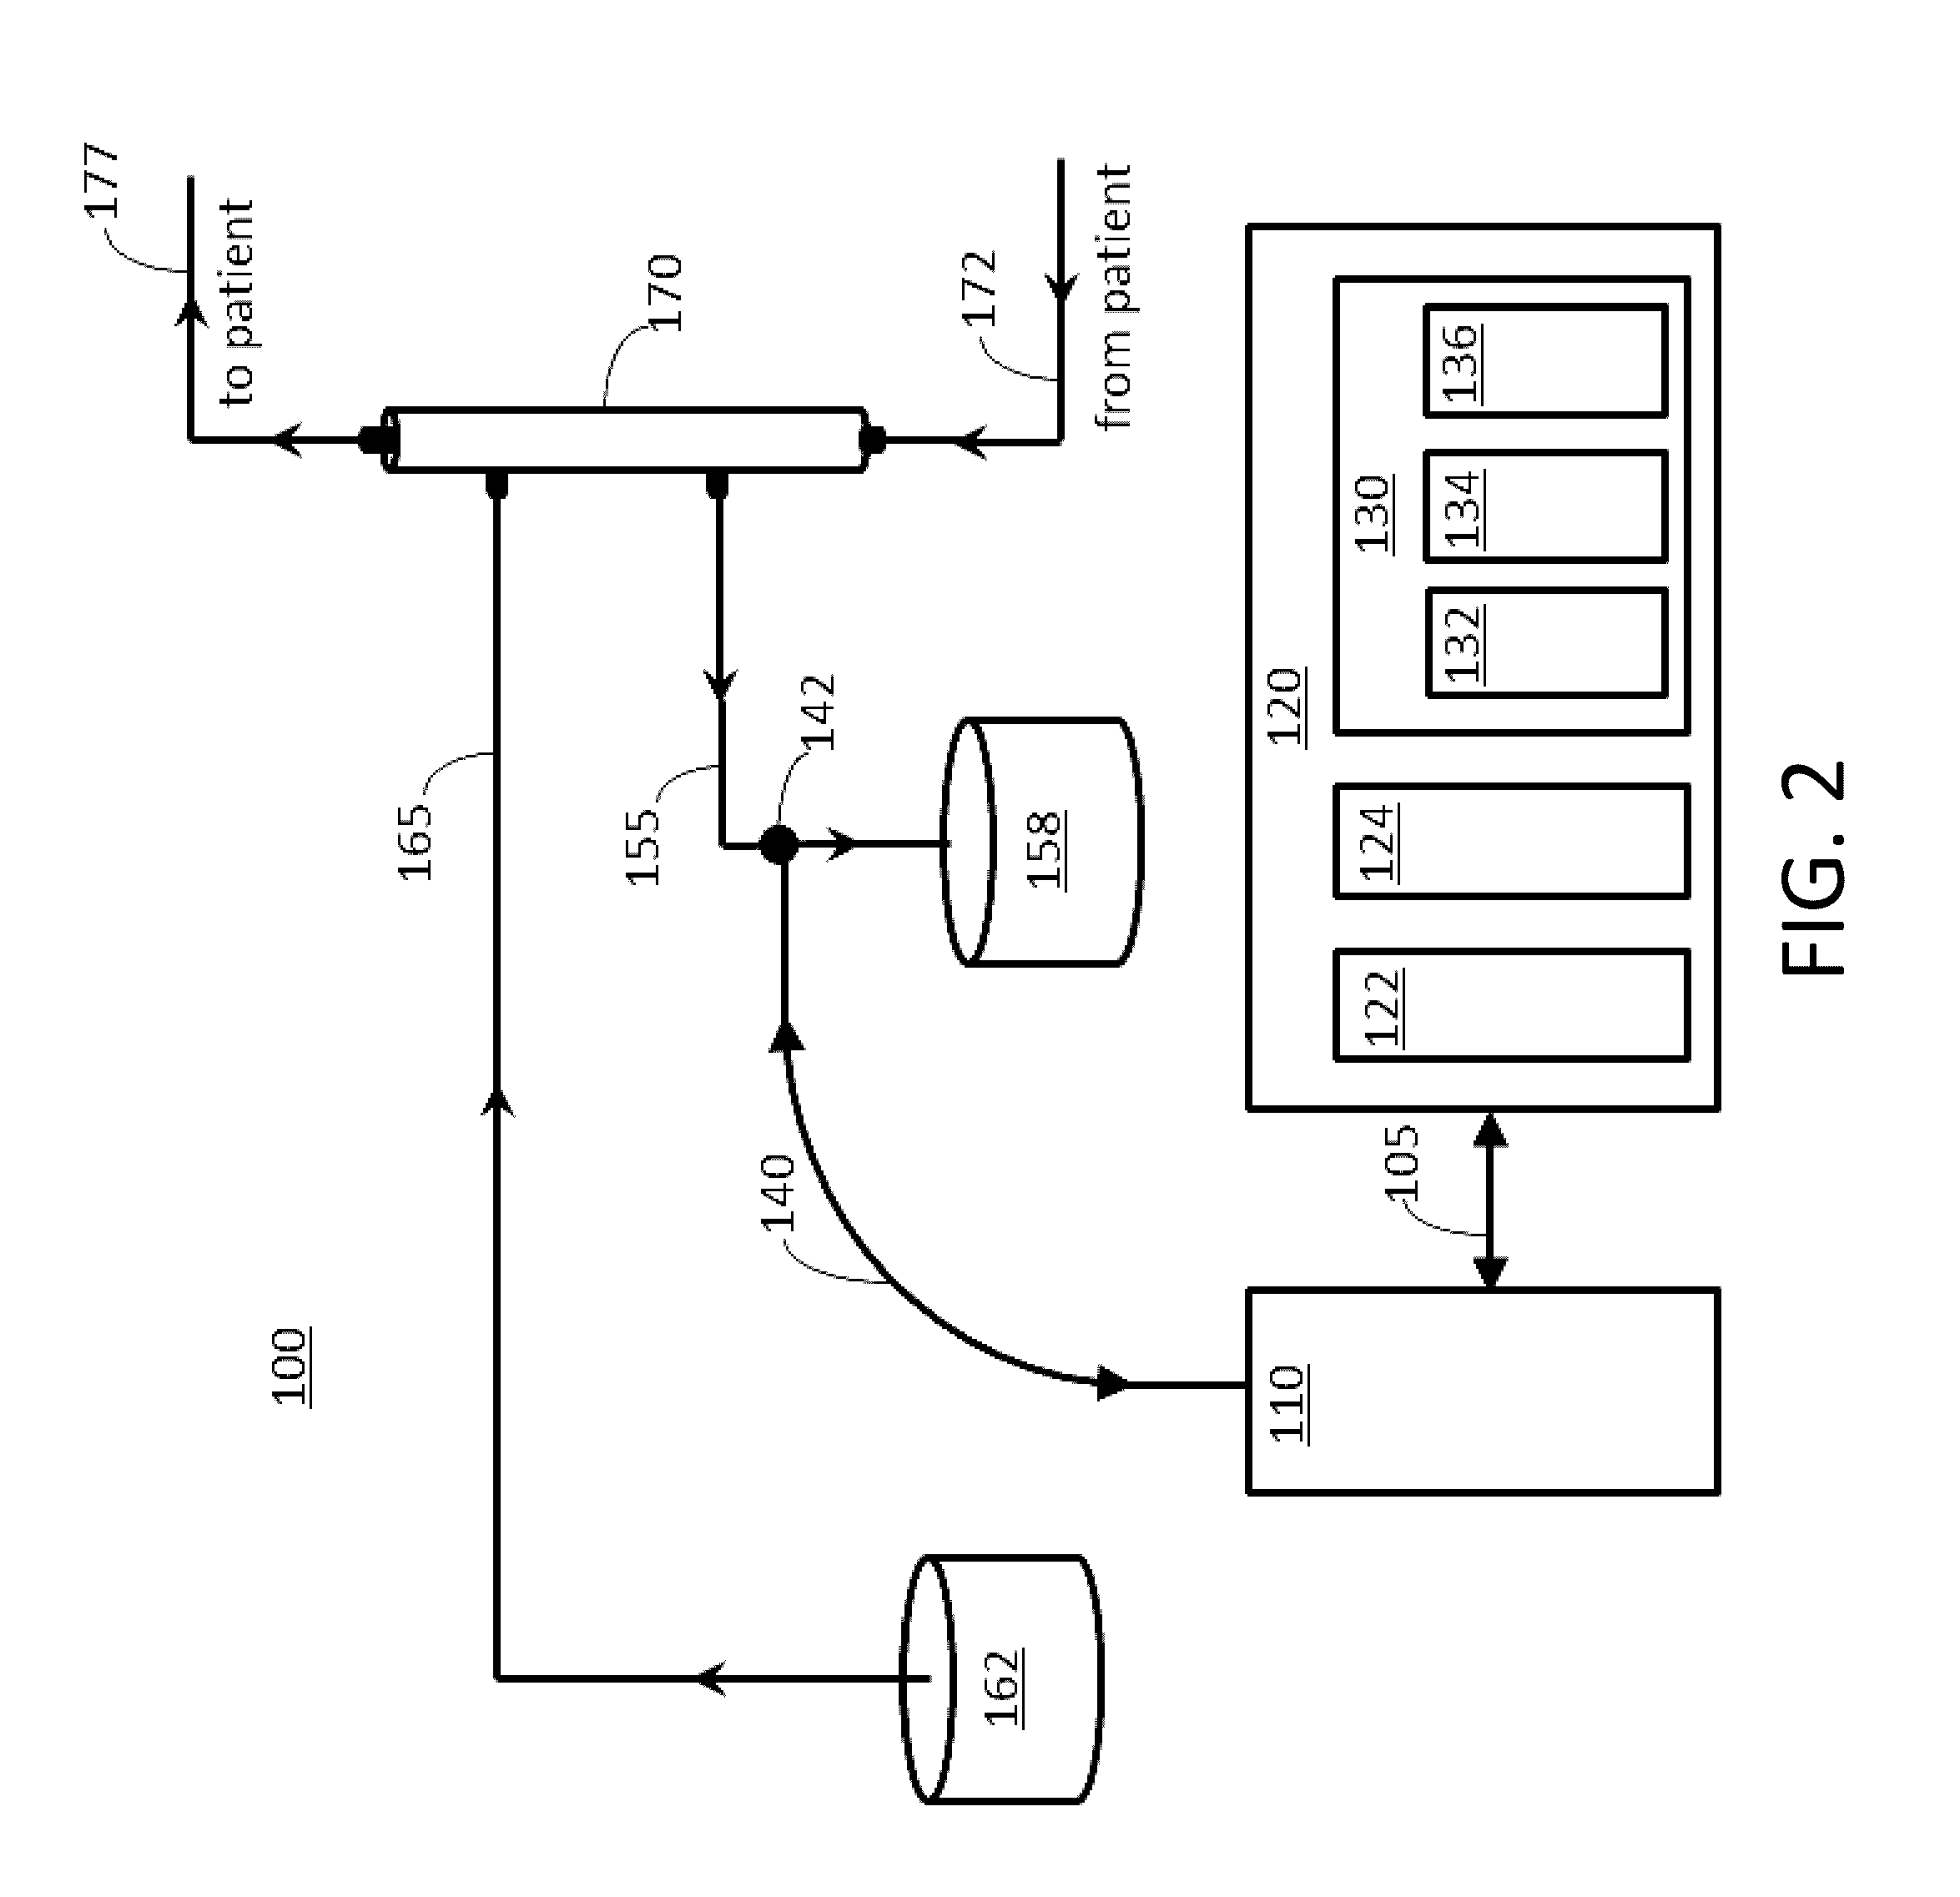 System and method for monitoring the health of dialysis patients